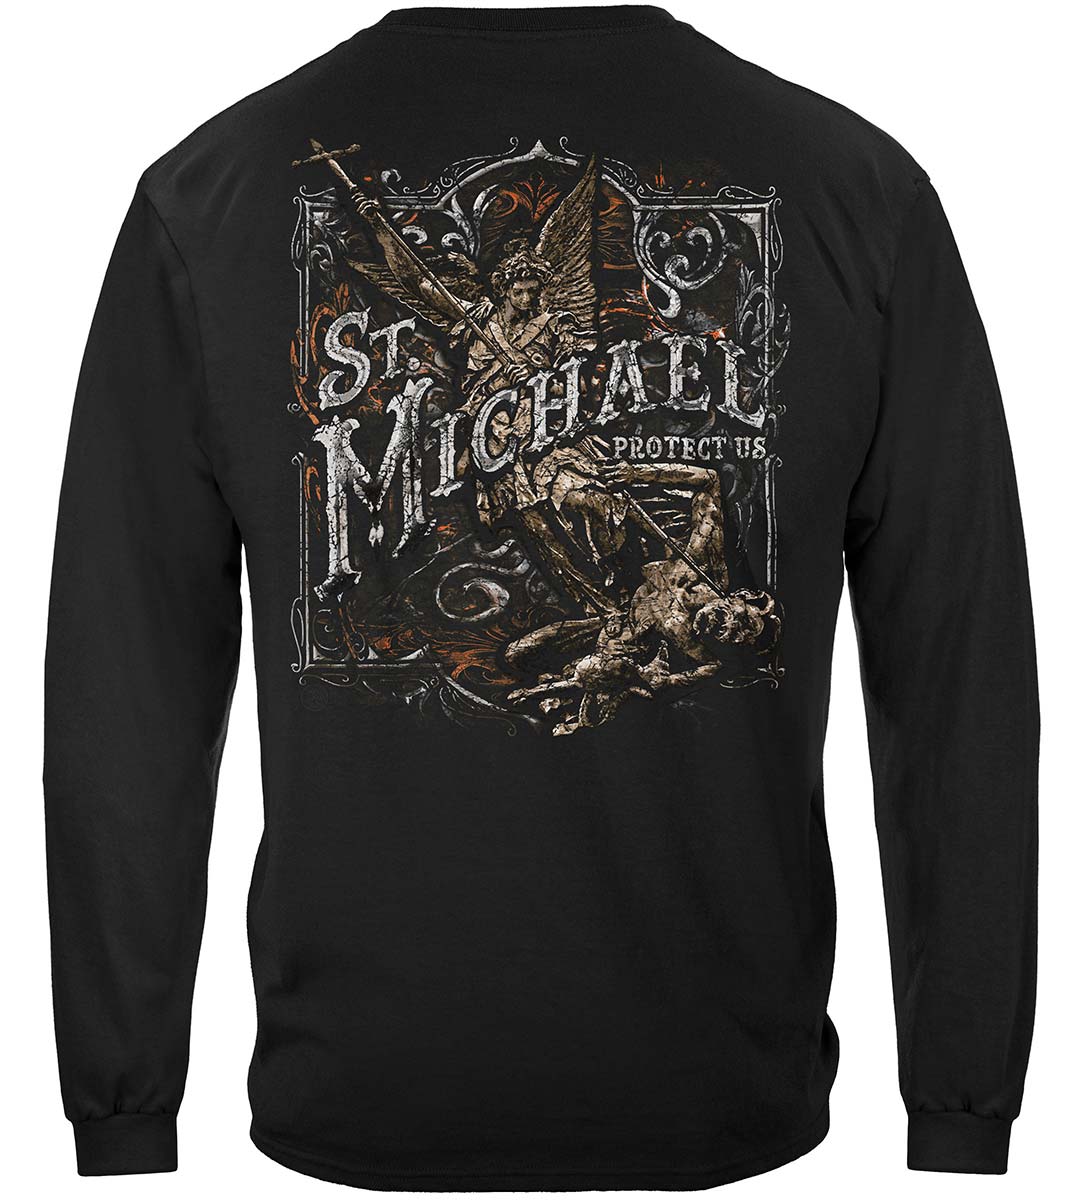 Firefighter St. Michael's Protect Us Silver Foil Premium Long Sleeves